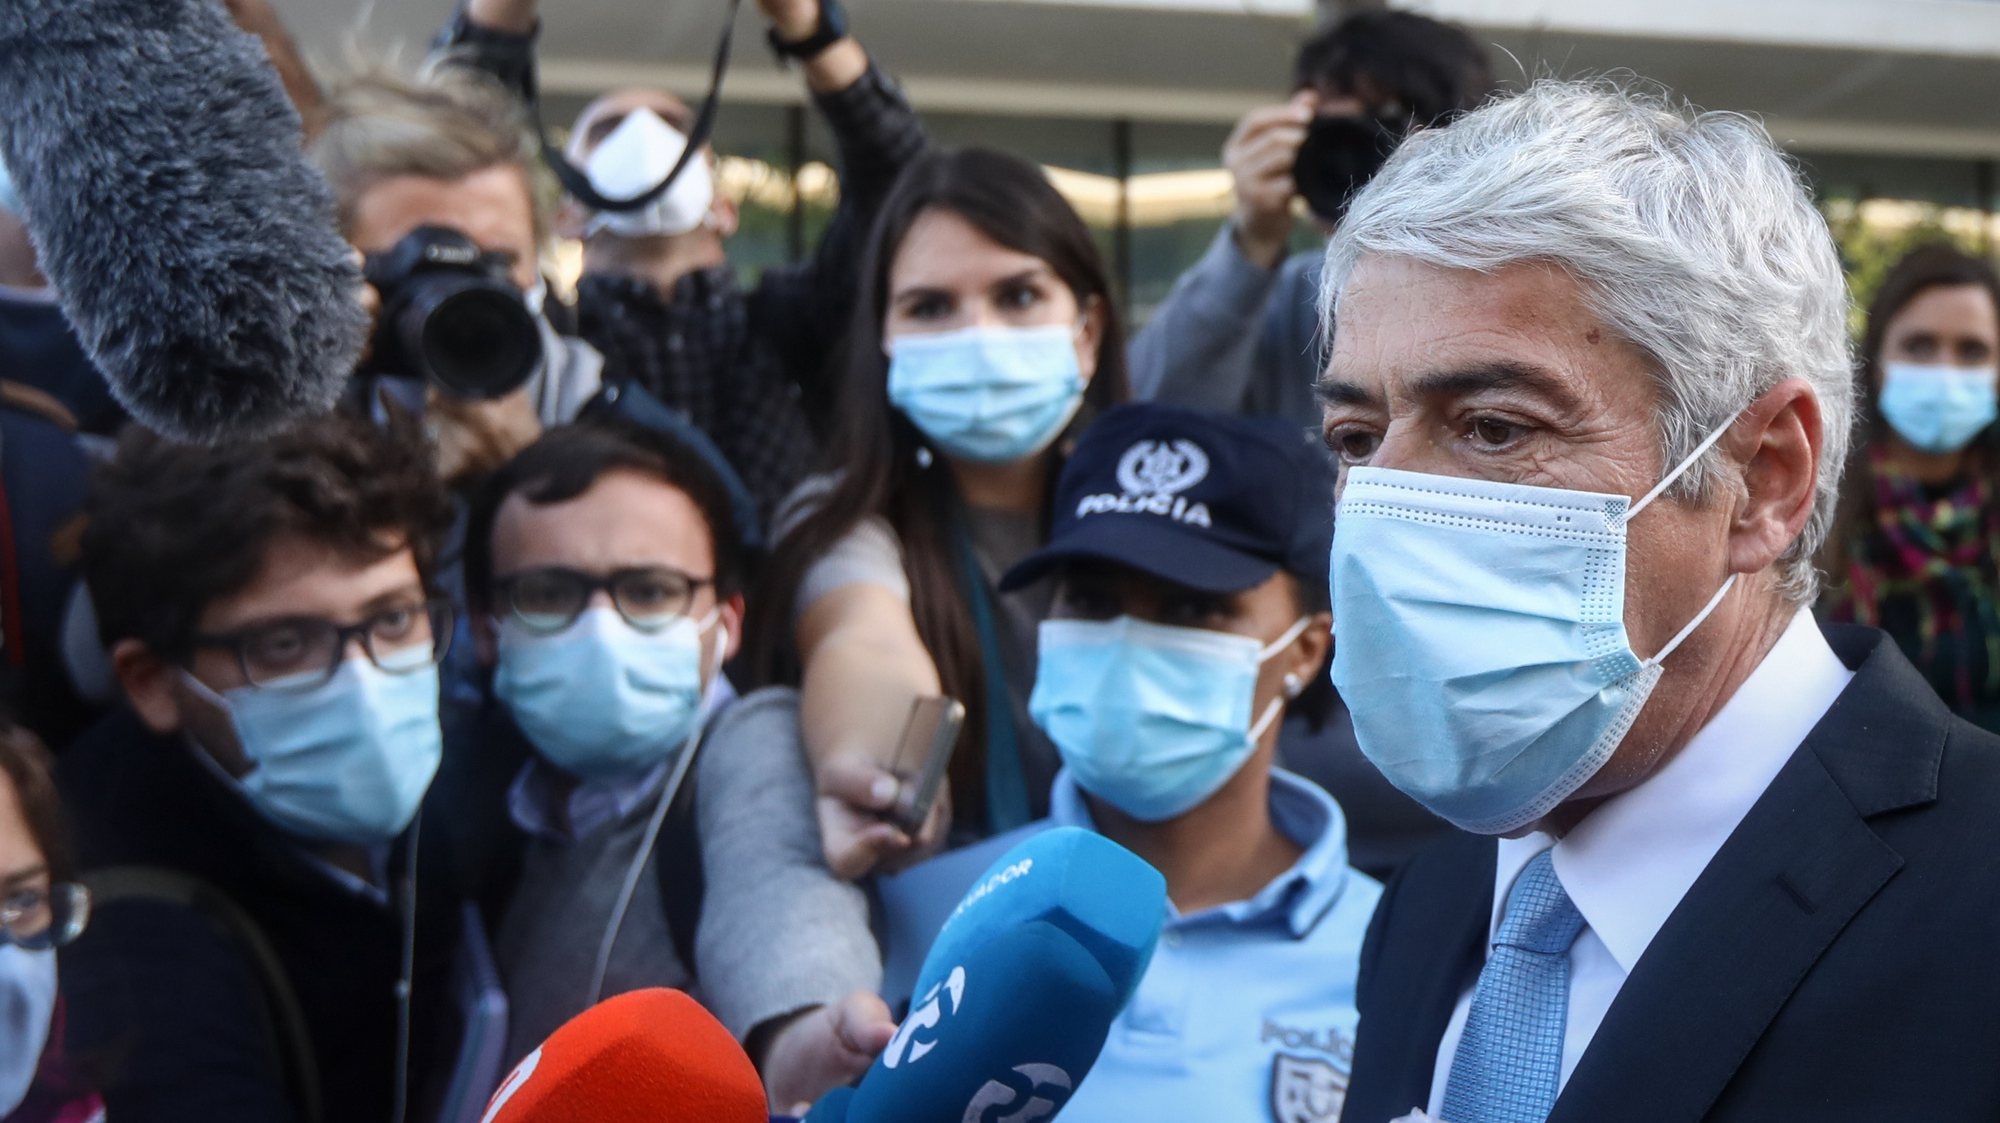 The defendant and former Prime Minister Jose Socrates talks to the press after the reading of the instructional decision of the high-profile corruption case known as Operation Marques, at the Justice Campus in Lisbon, Portugal, 09 April 2021. Operation Marques has 28 defendants - 19 people and 9 companies - including former Prime Minister Jose Socrates, banker Ricardo Salgado, businessman and friend of Socrates Carlos Santos Silva, and senior executives of Portugal Telecom, and is related to crimes of active and passive corruption, money laundering, document forgery, and tax fraud.  ANTÓNIO COTRIM/LUSA